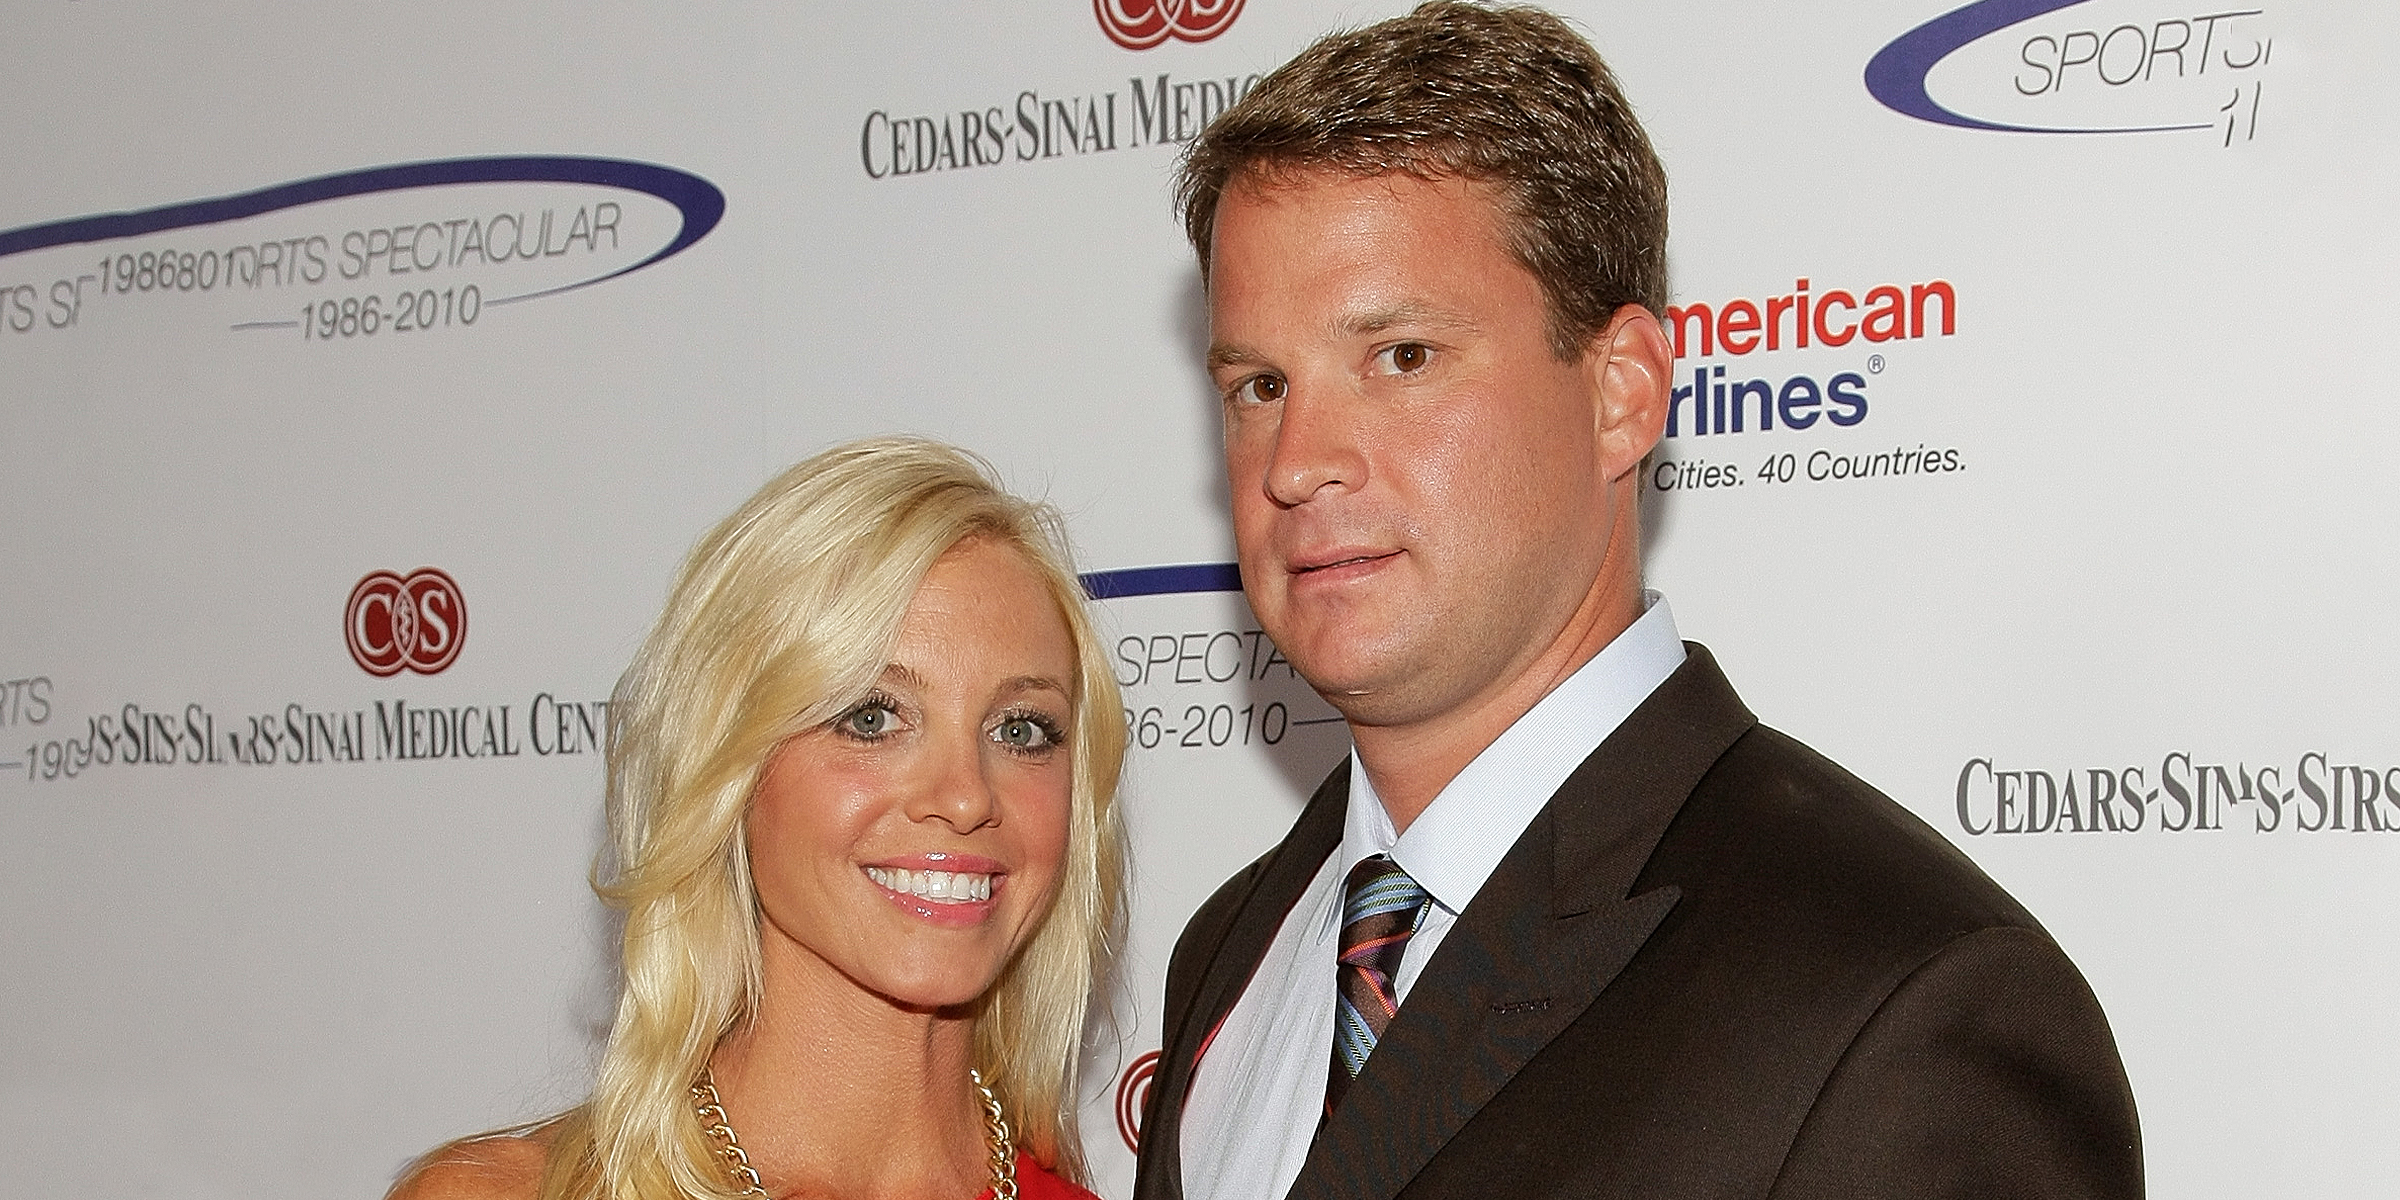 Layla Kiffin and Lane Kiffin, 2010 | Source: Getty Images